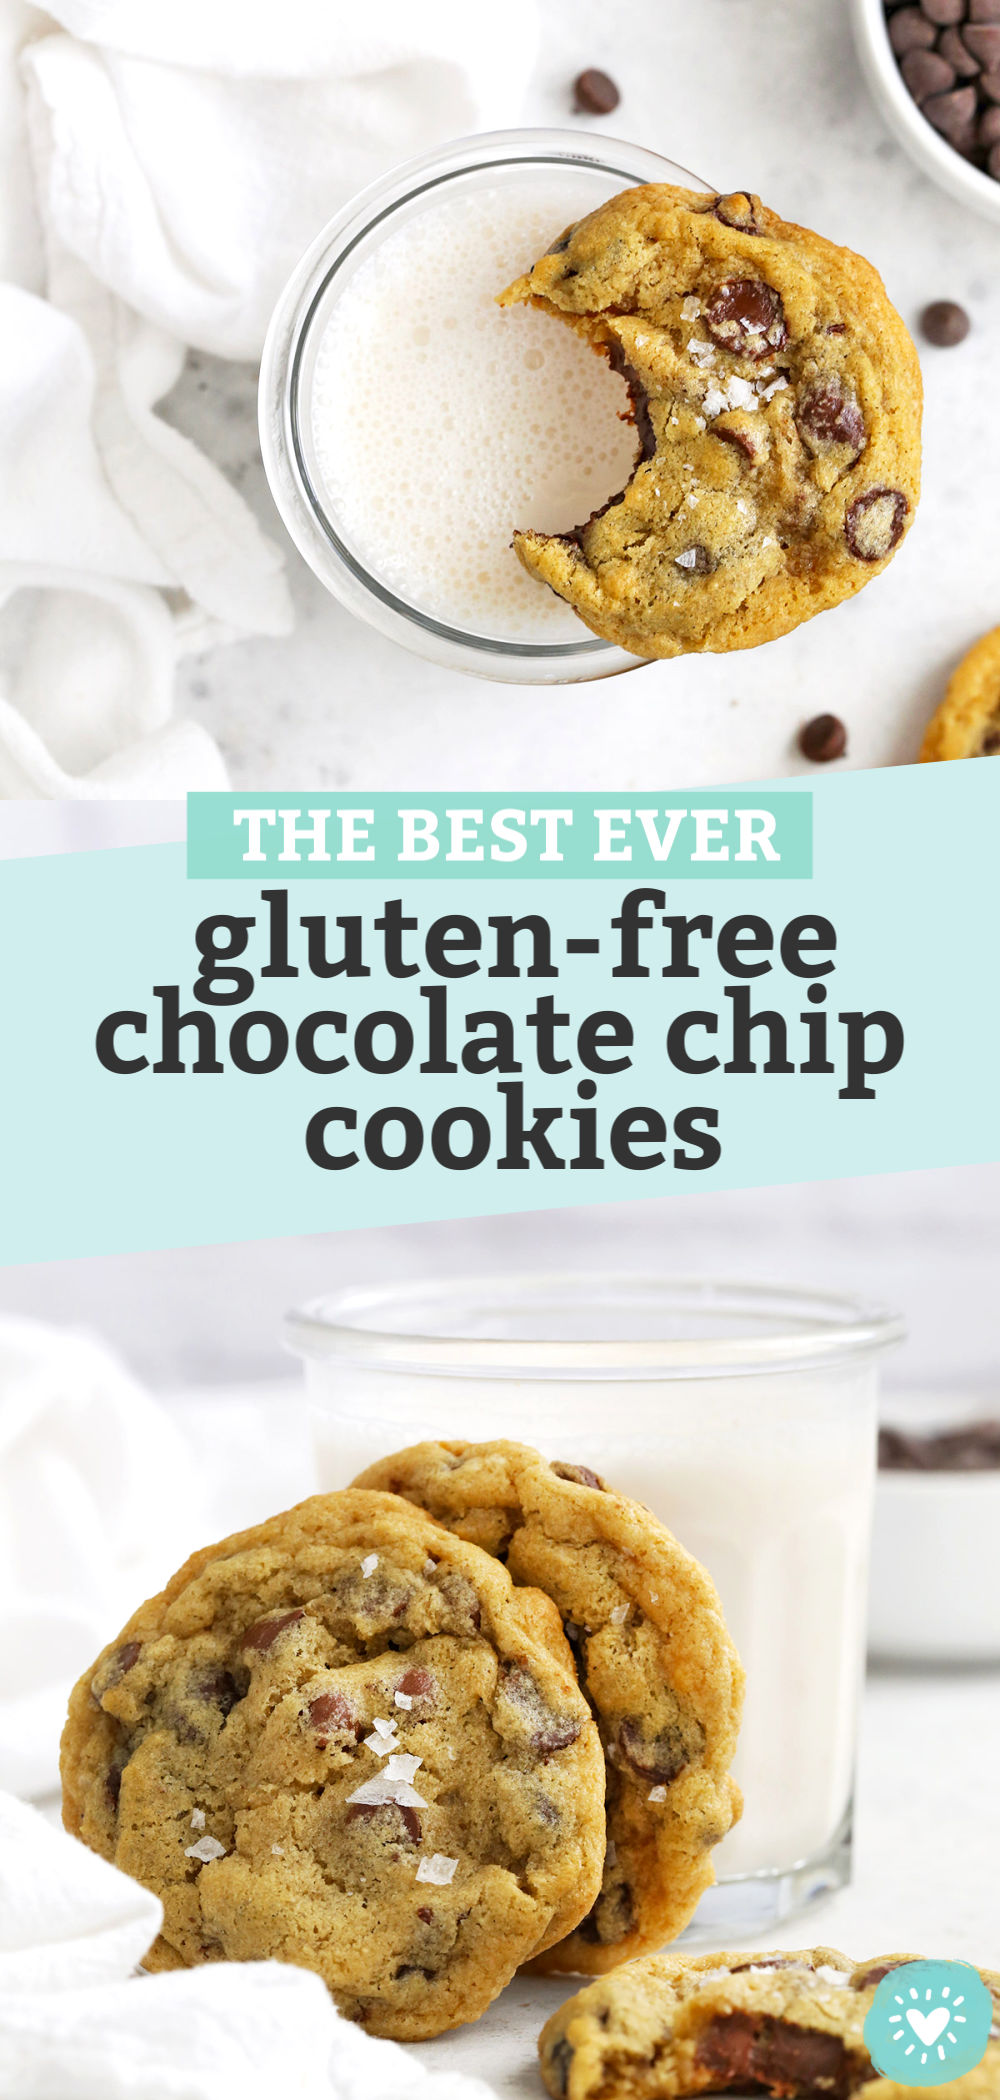 Collage of images of gluten free chocolate chip cookies with text overlay that reads "The Best Ever Gluten-Free Chocolate Chip Cookies"